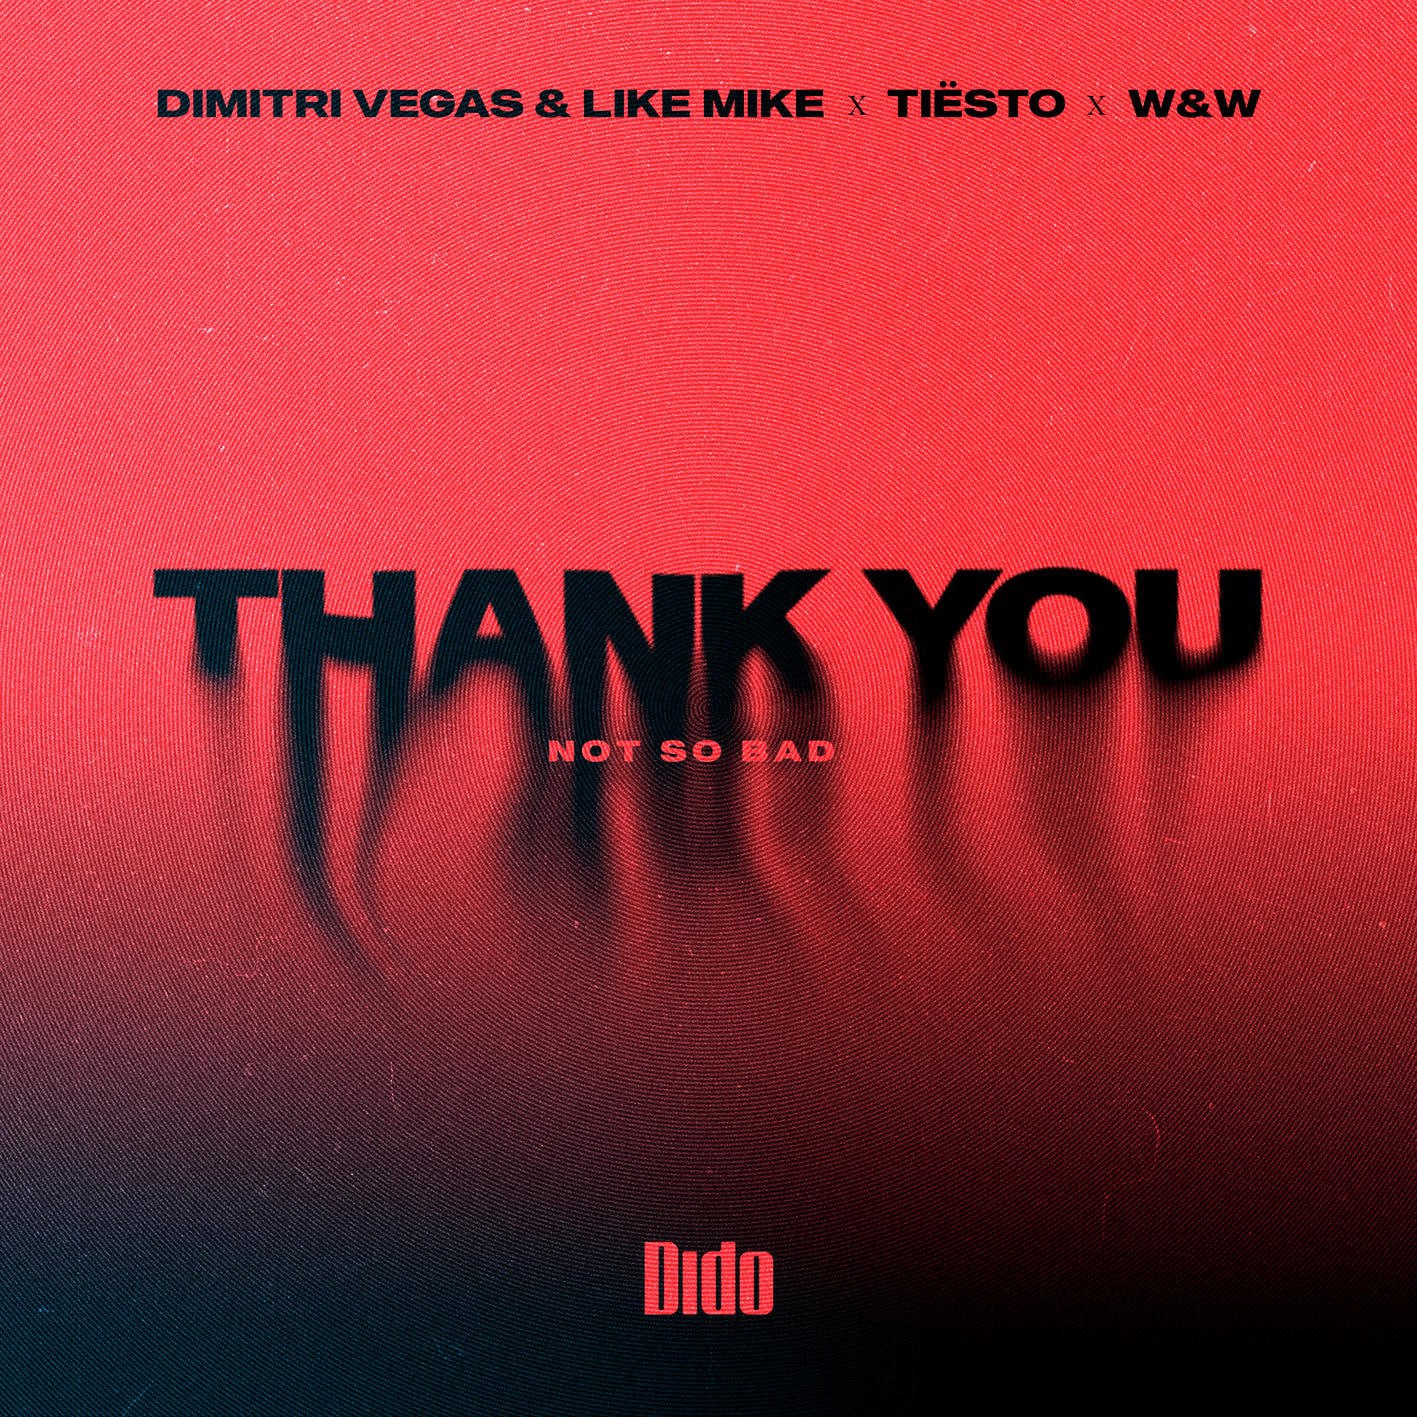 Dimitri Vegas &amp; Like Mike, Tiësto, Dido, & W&amp;W Thank You (Not So Bad) cover artwork